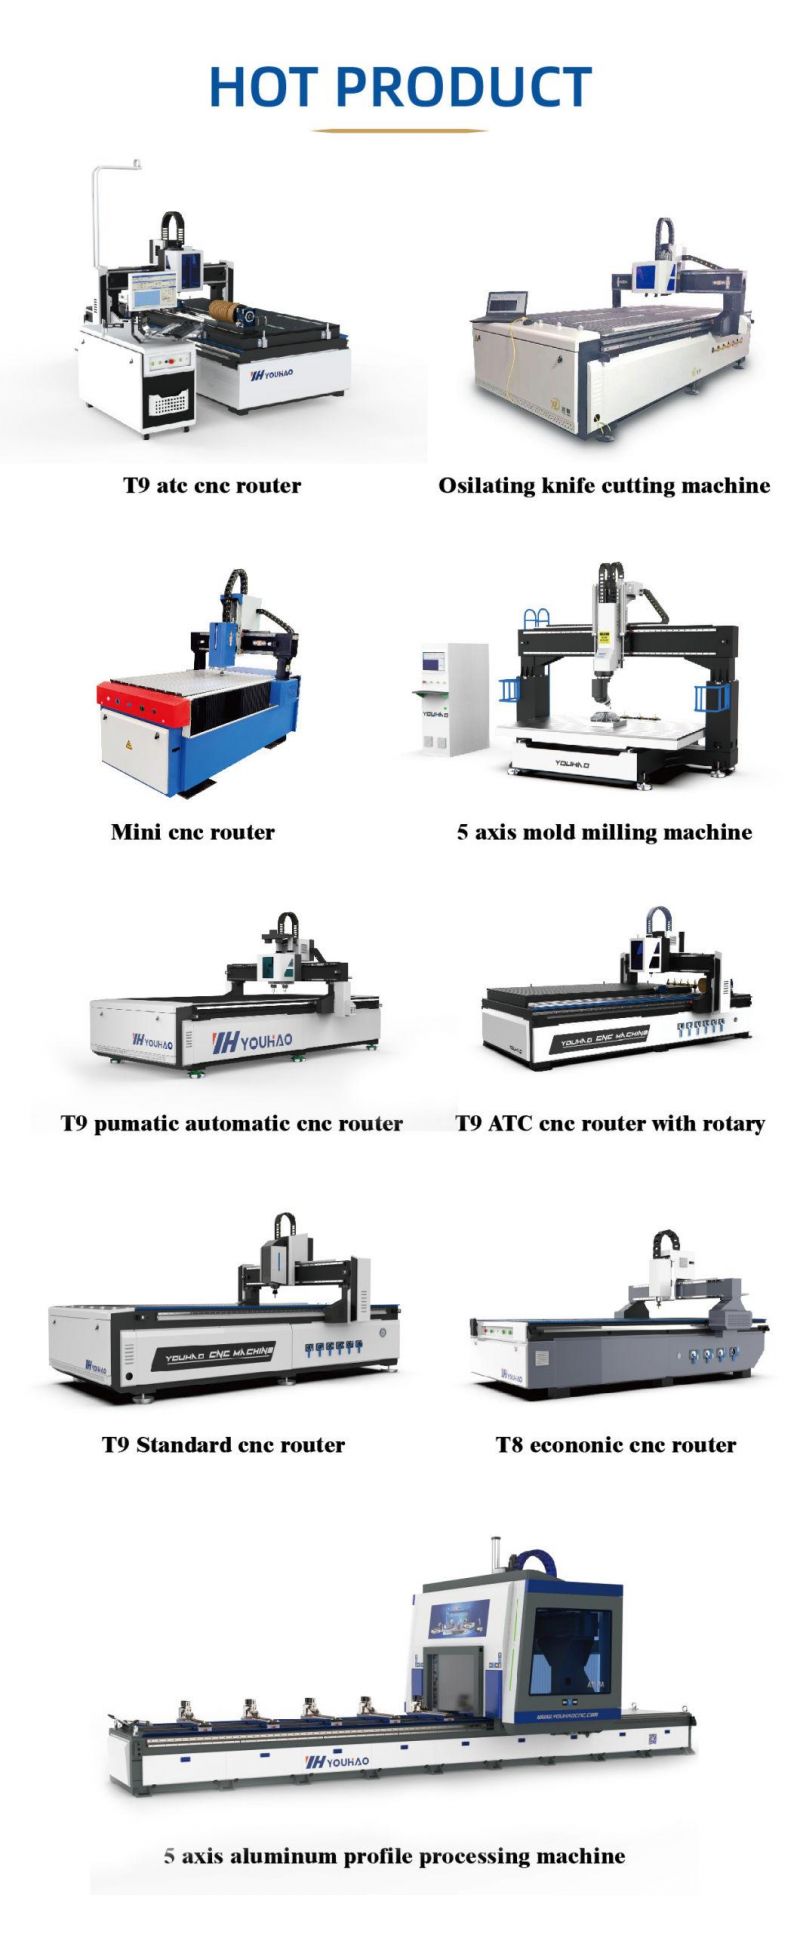 2 Head Atc 3D CNC Router for Wood Carving Machine Price